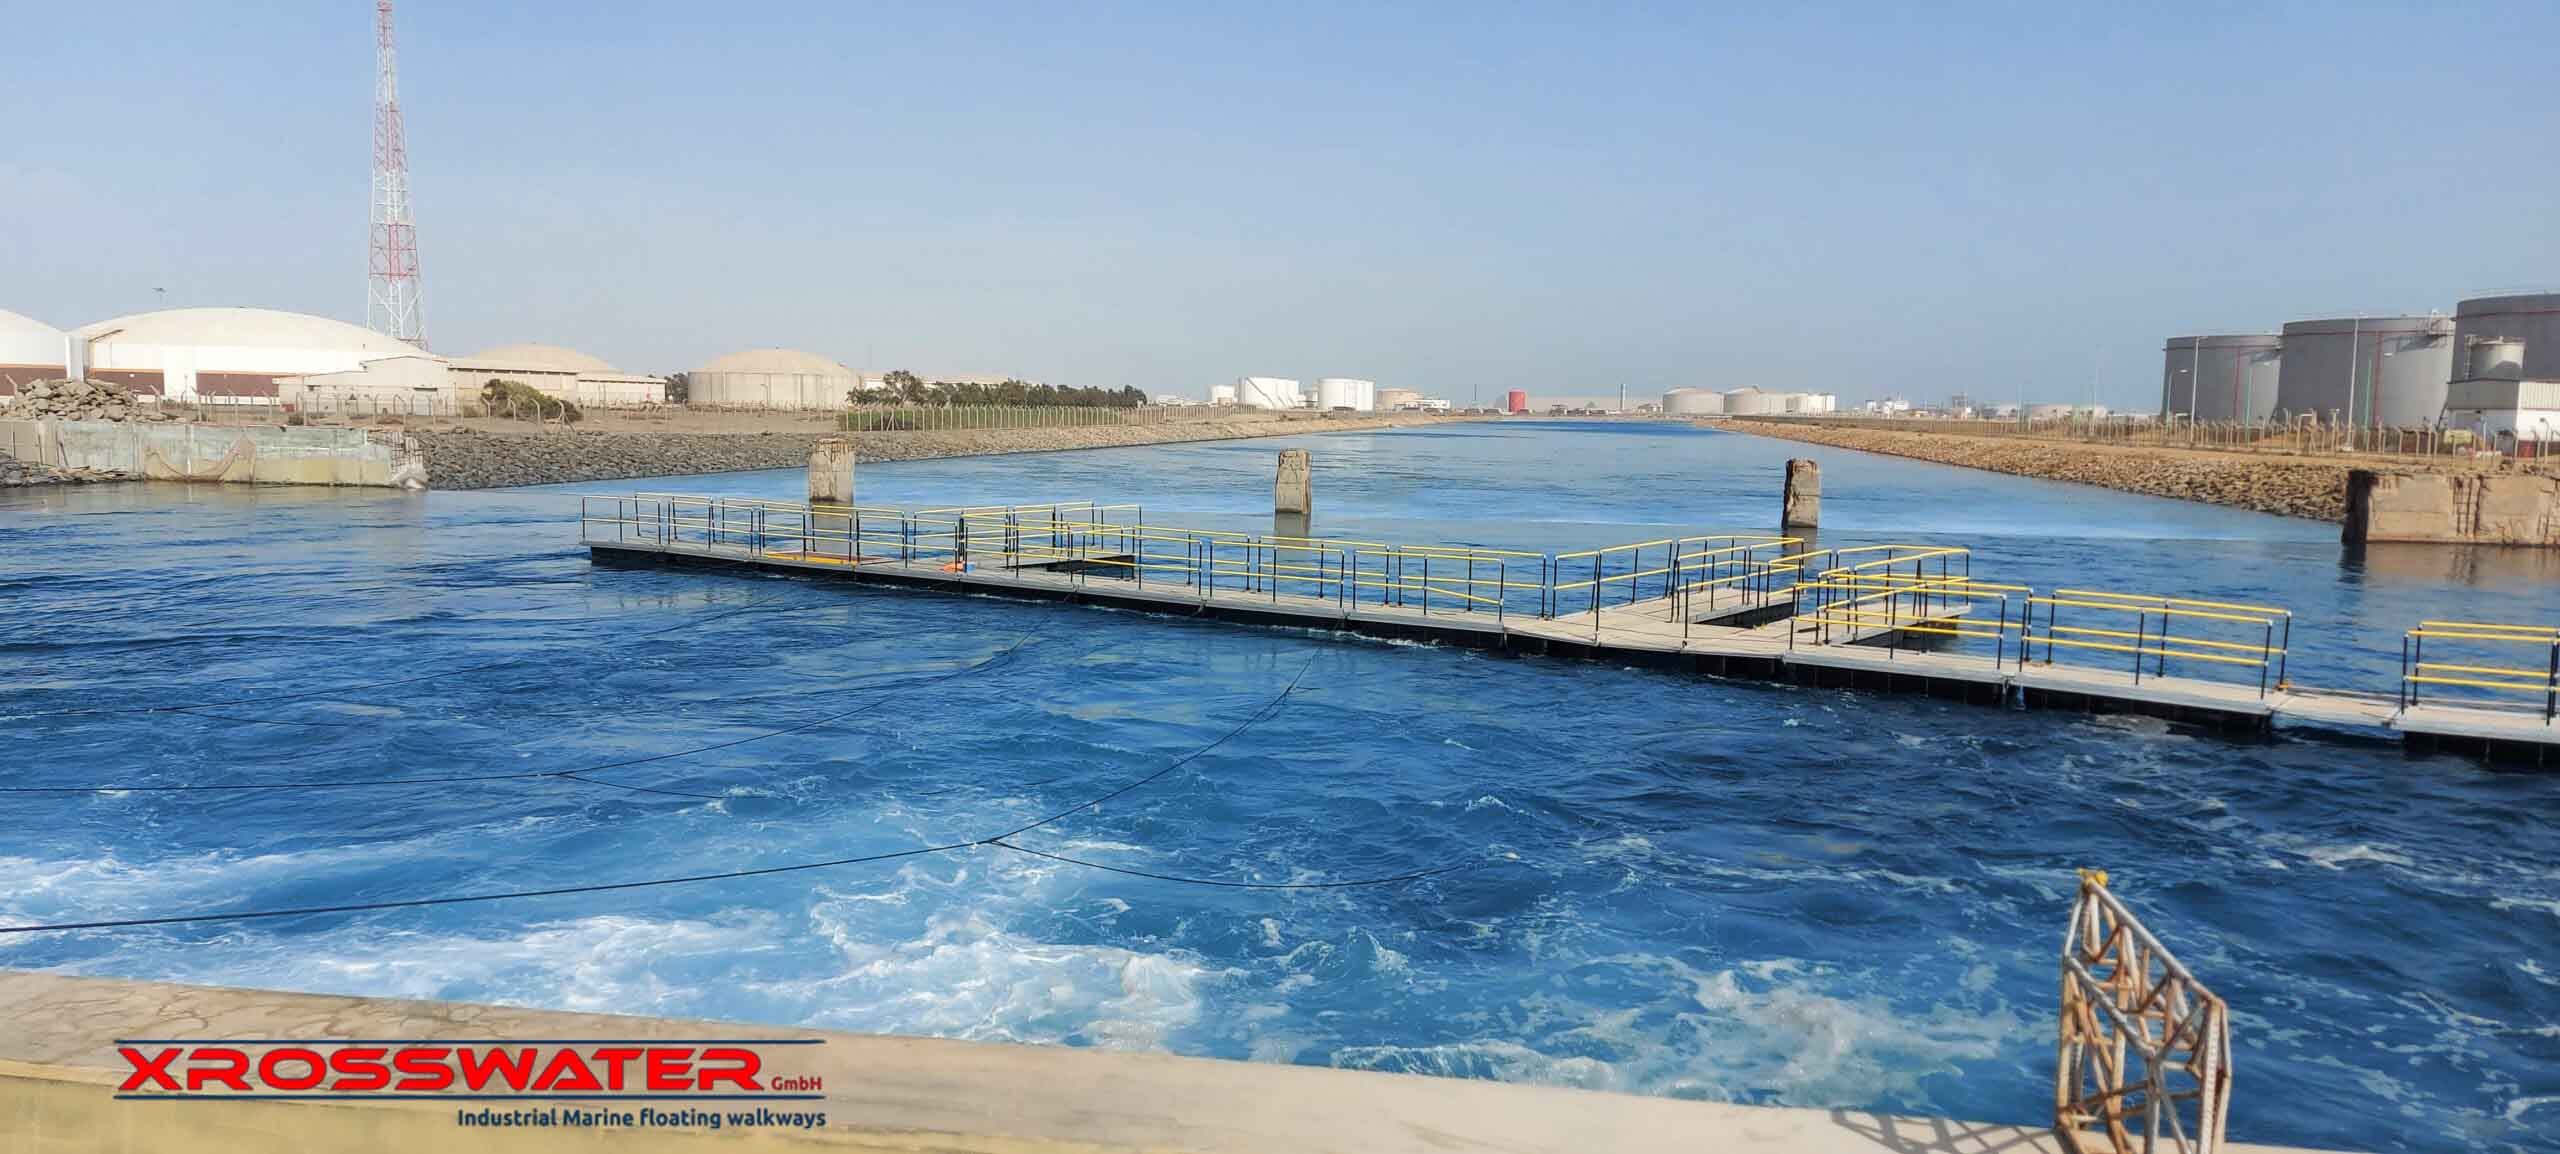 Xroswatter walkways installed over the dam with water running rapidly in full operation of the plant